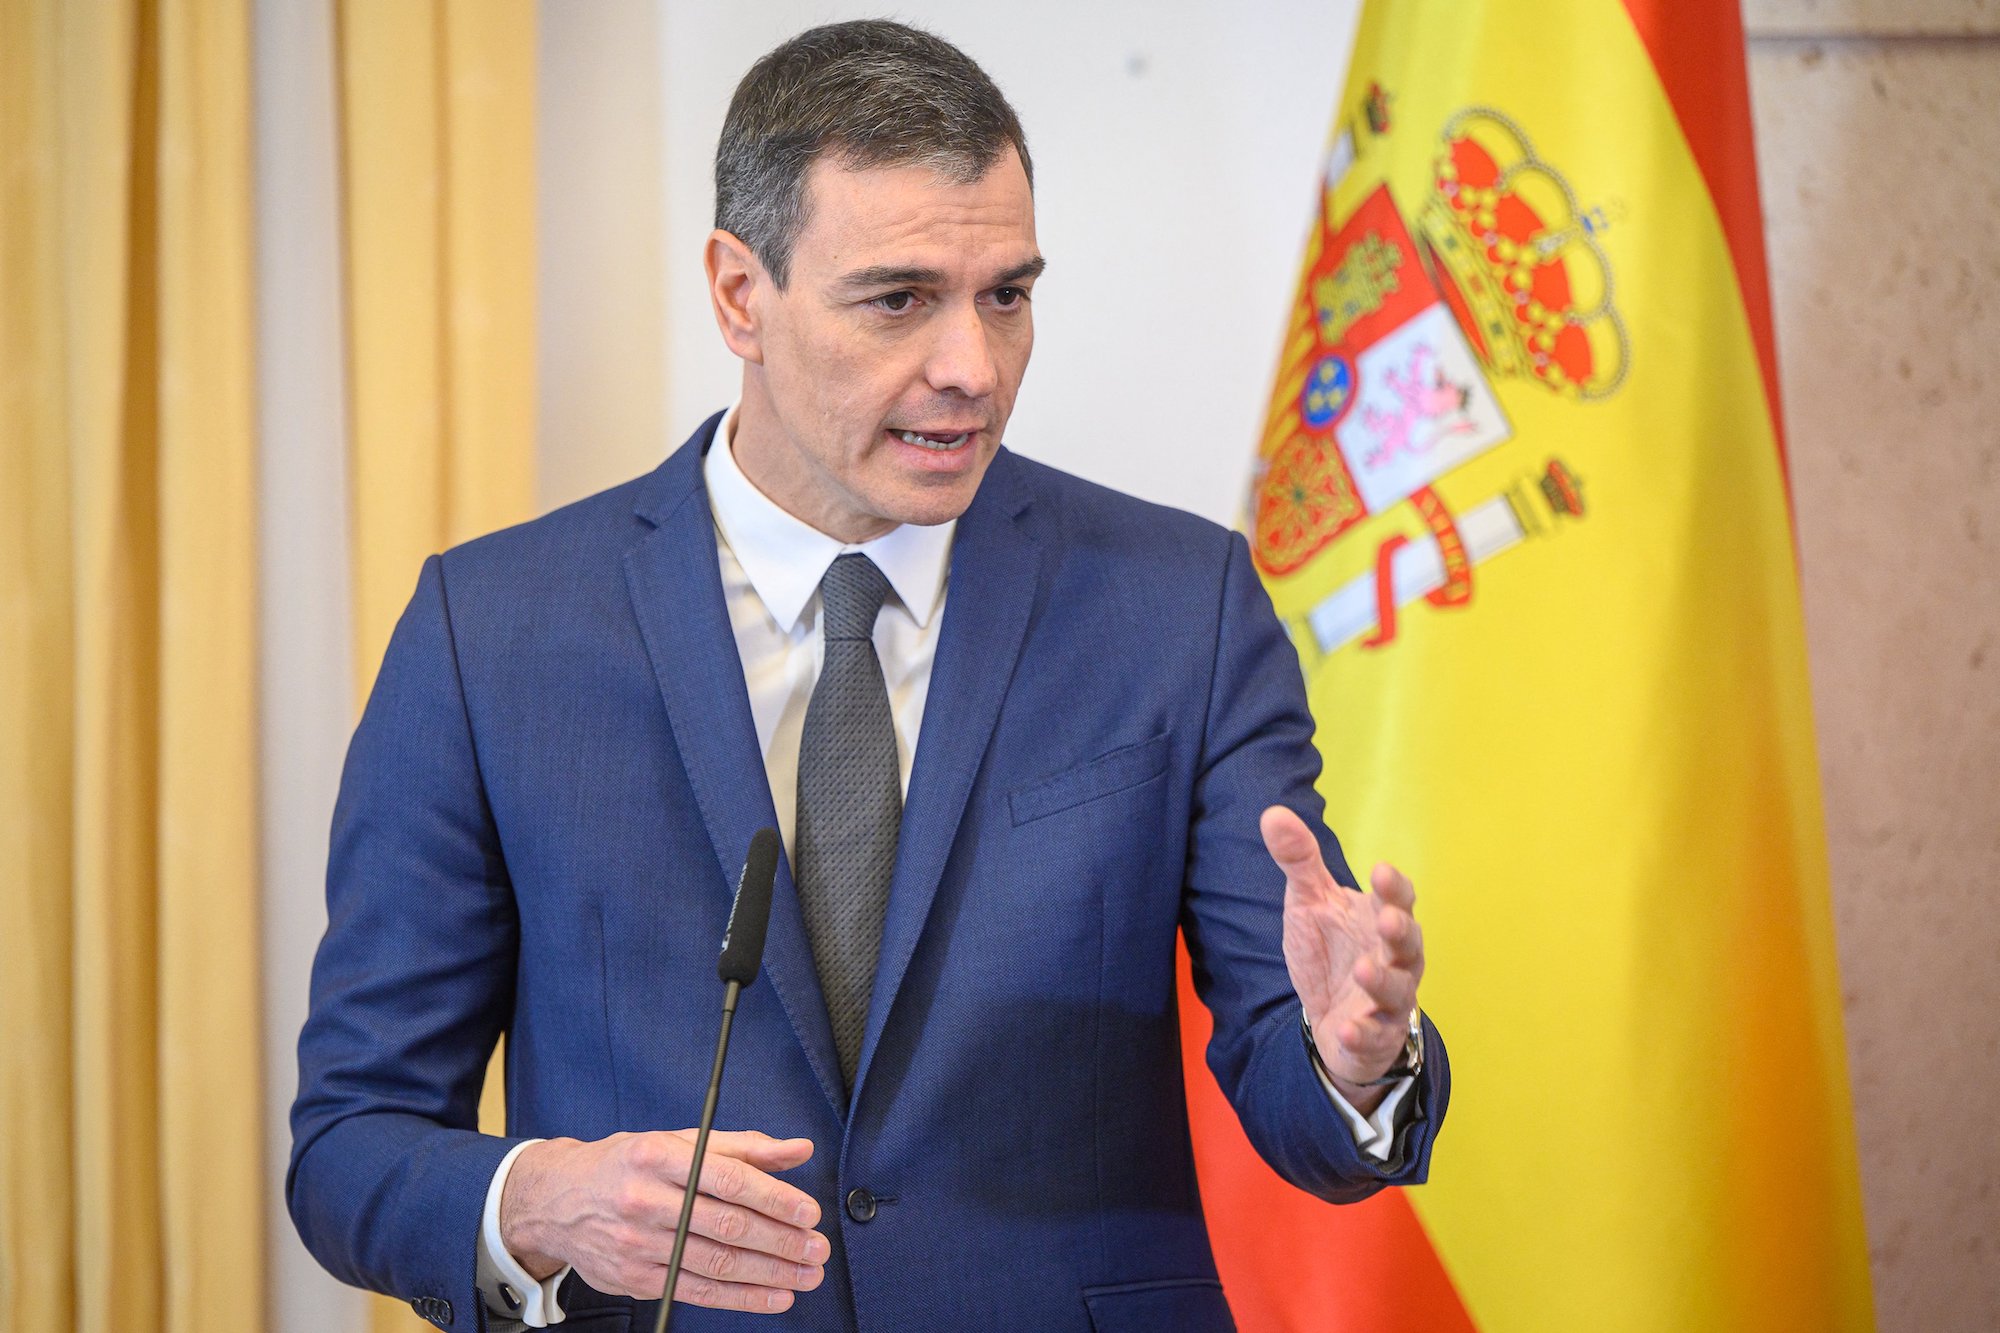 Spanish Prime Minister Pedro Sánchez gives a press conference in Slovenia on February 17.